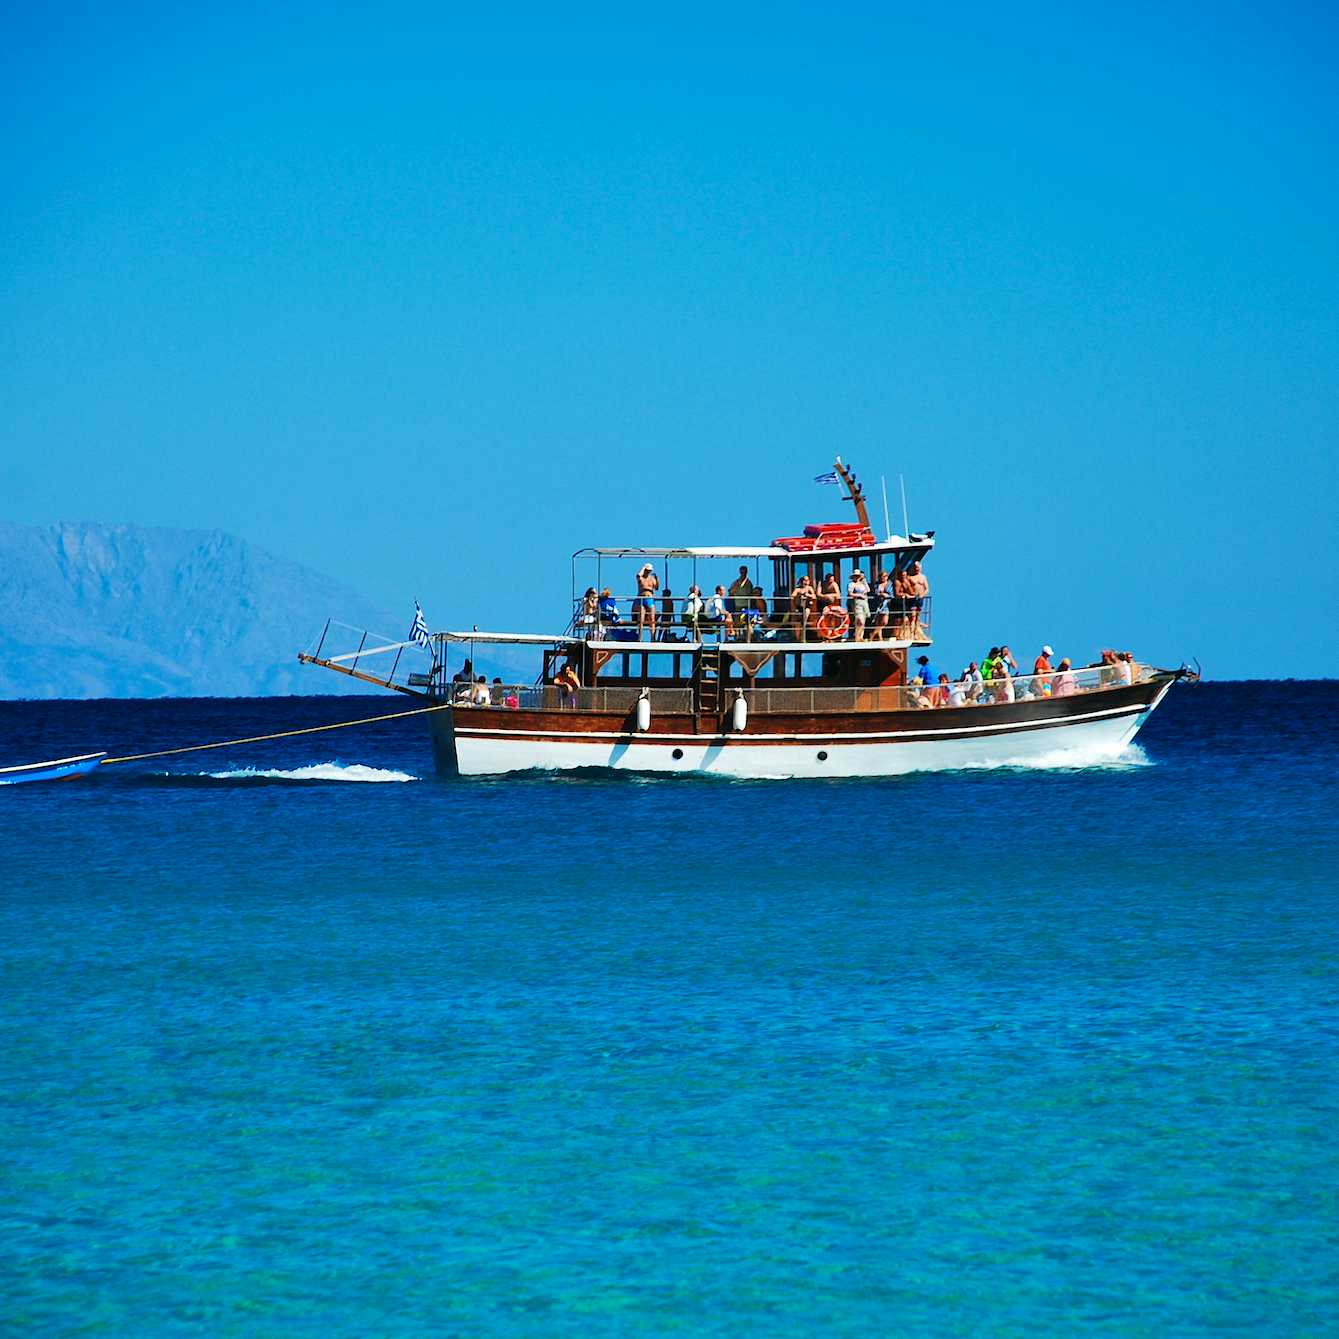 Photo Caption: Take a day trip and cruise along the beautiful bay